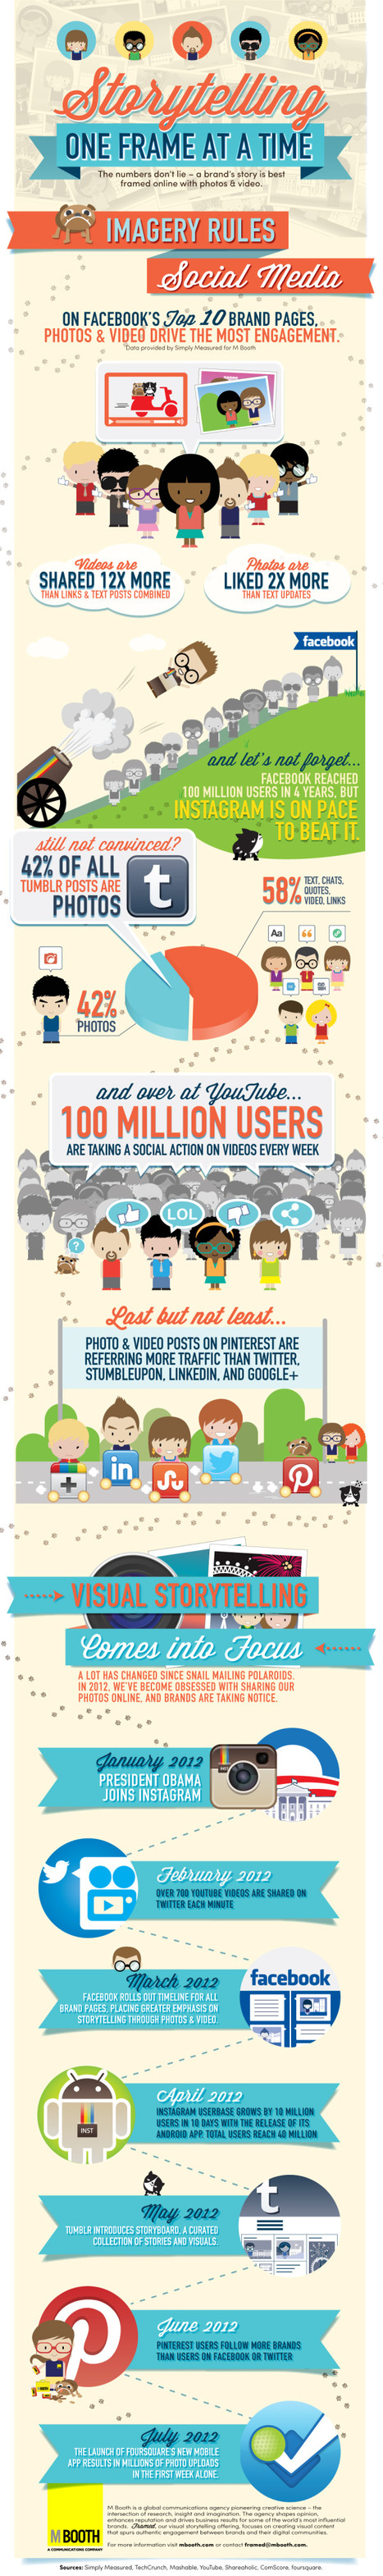 Visual Content Trumps Text in Driving Social Media Engagement [INFOGRAPHIC] | MarketingHits | Scoop.it